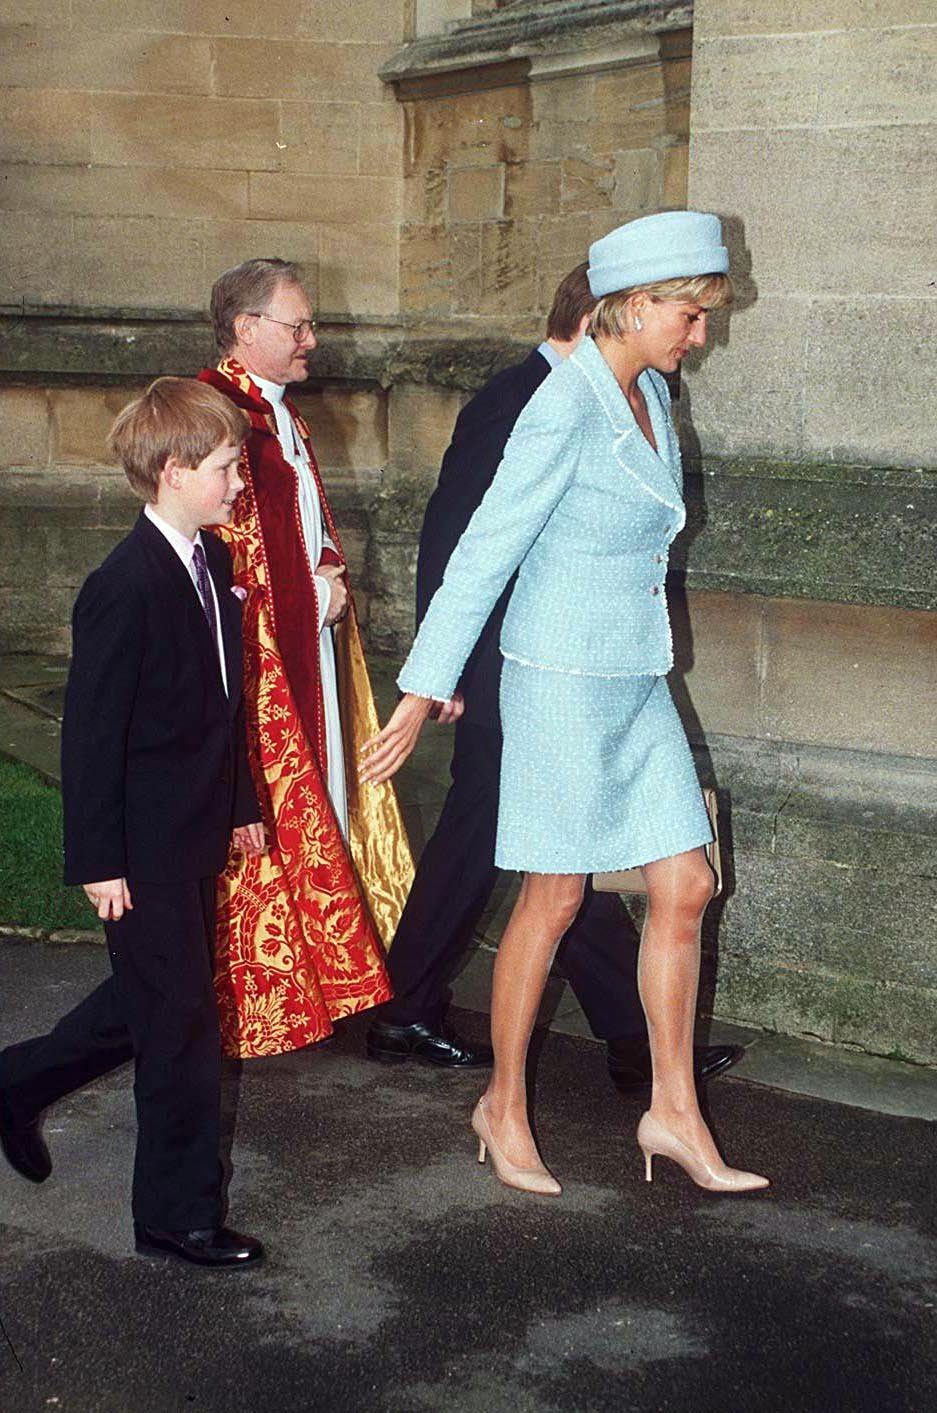 PRINCE WILLIAM CONFIRMATION AT WINDSOR CASTLE, BRITAIN - 1997